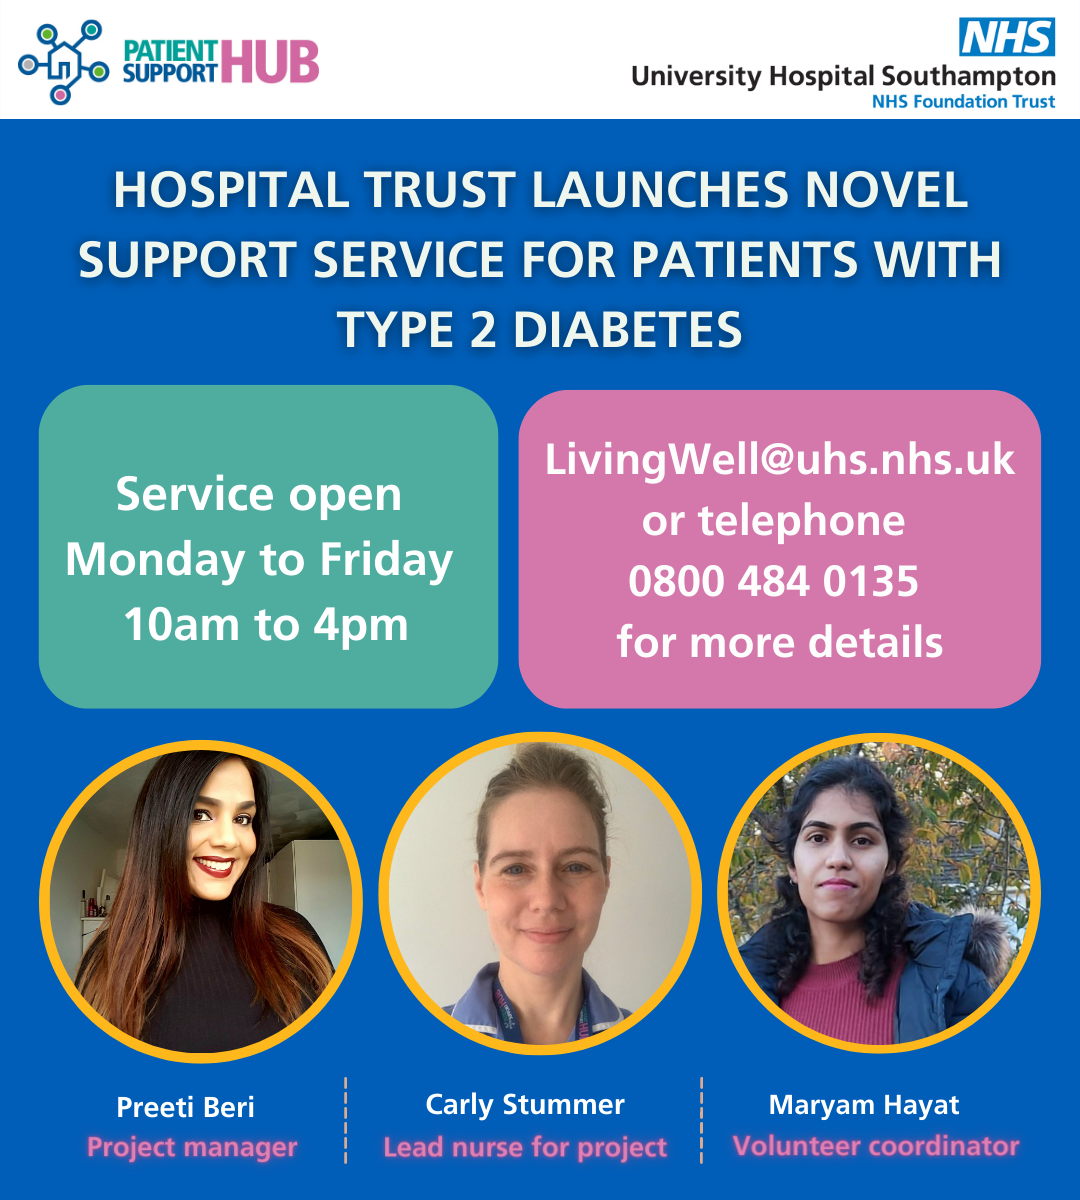 Hospital Trust launches novel support service for patients with type 2 diabetes